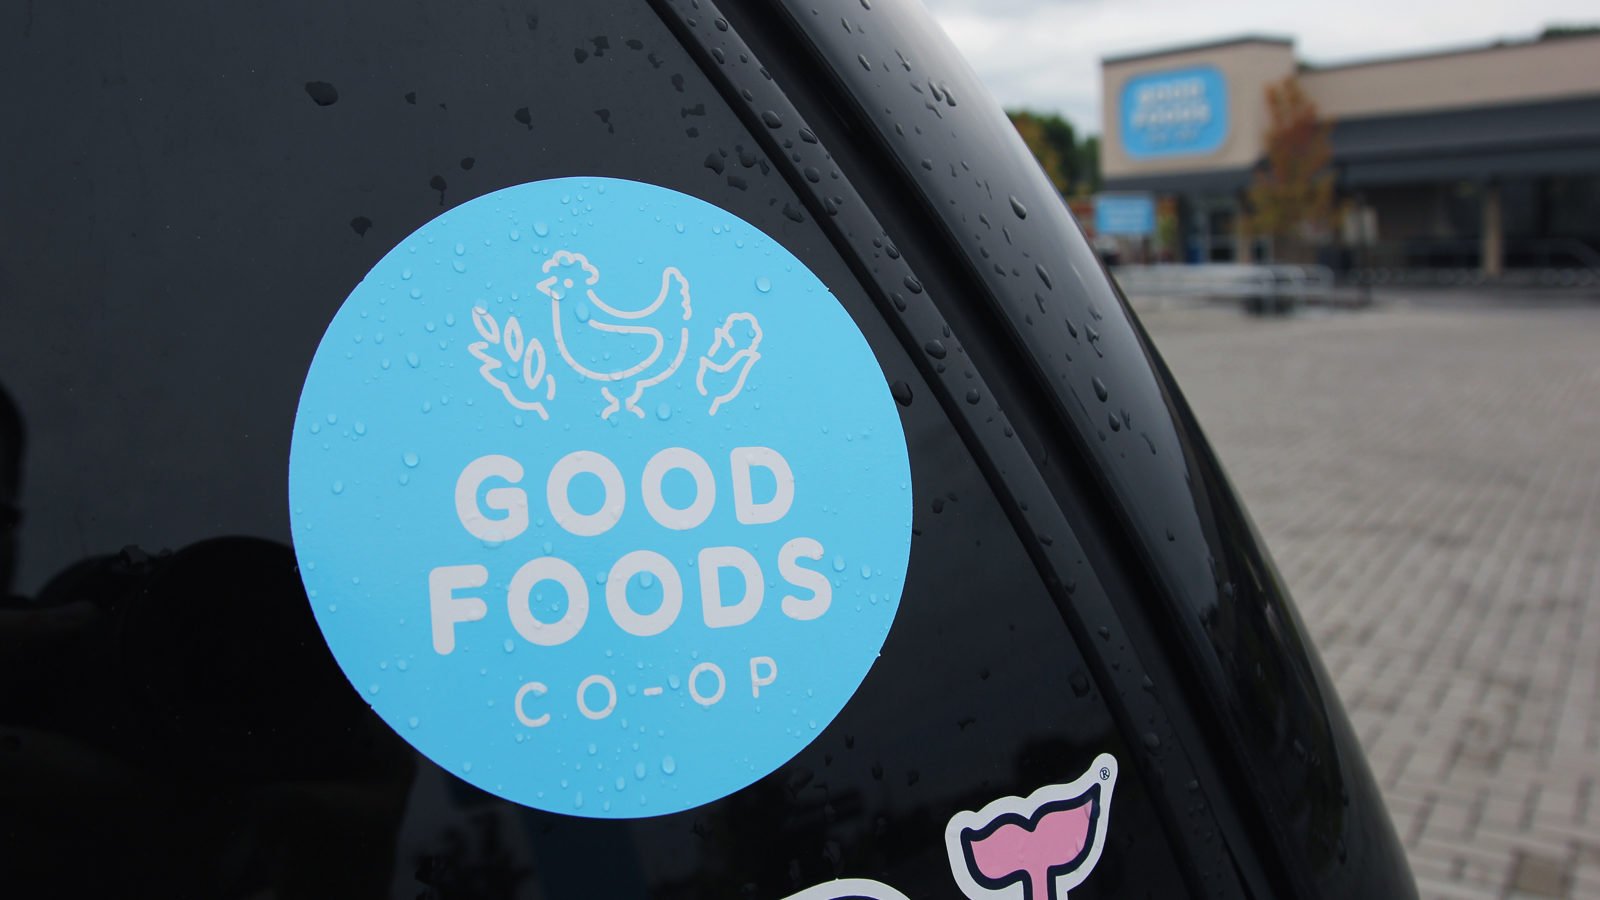 A Brand Identity for Good Foods Co-op by Bullhorn Creative